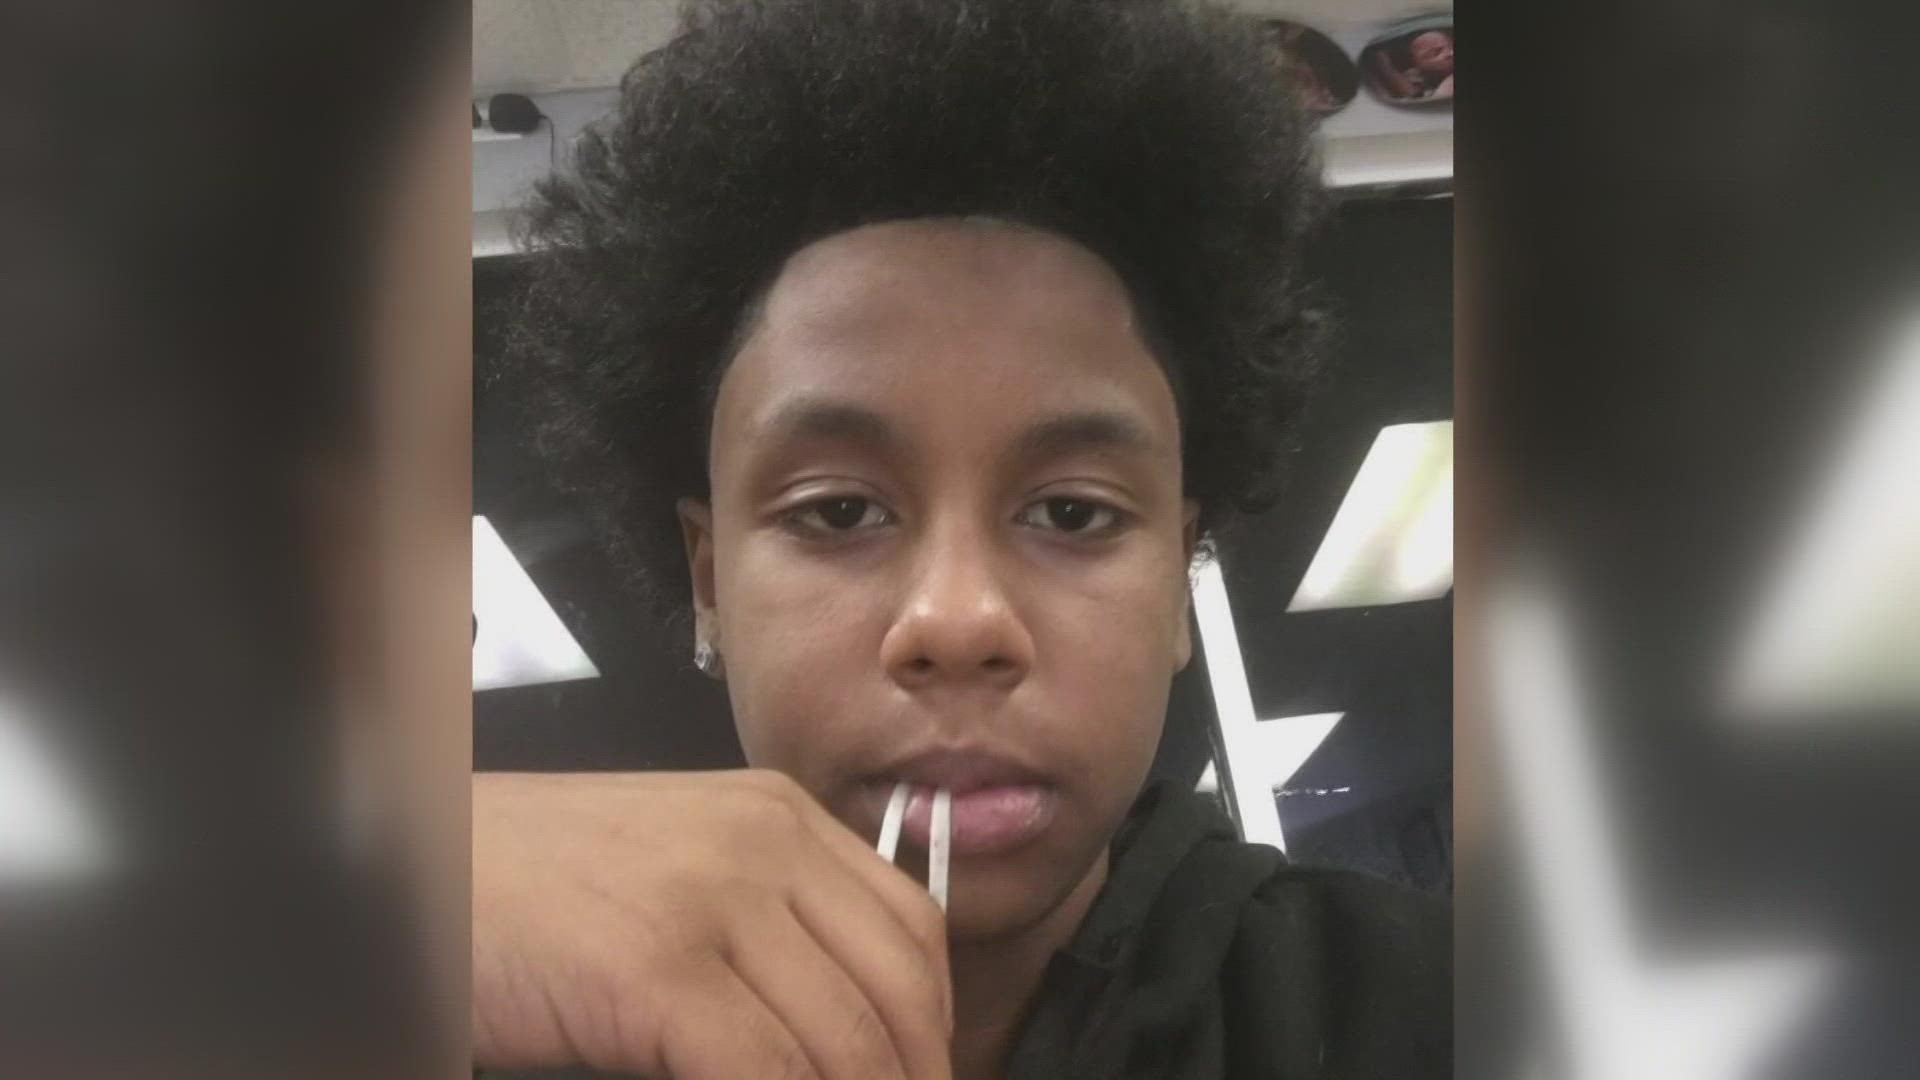 13-year-old Sinzae Reed was shot outside of his family's apartment in the Hilltop neighborhood on Oct. 12.